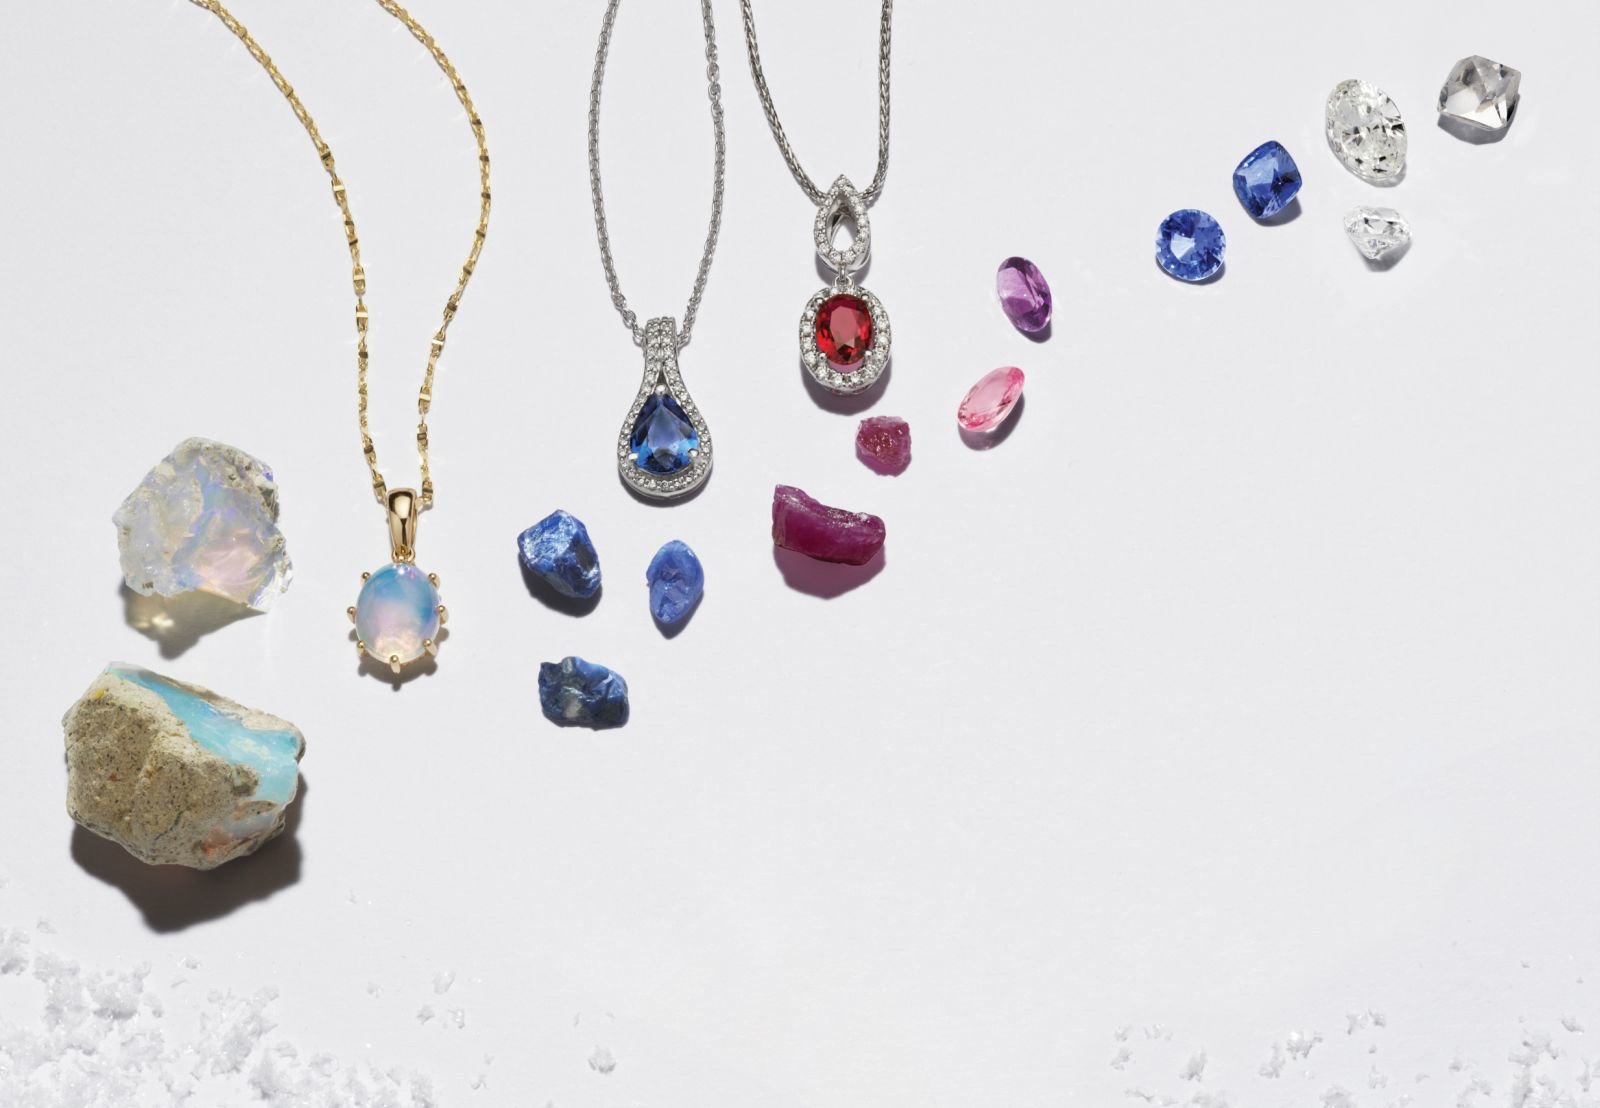 A collection of fashion jewelry with raw gemstones